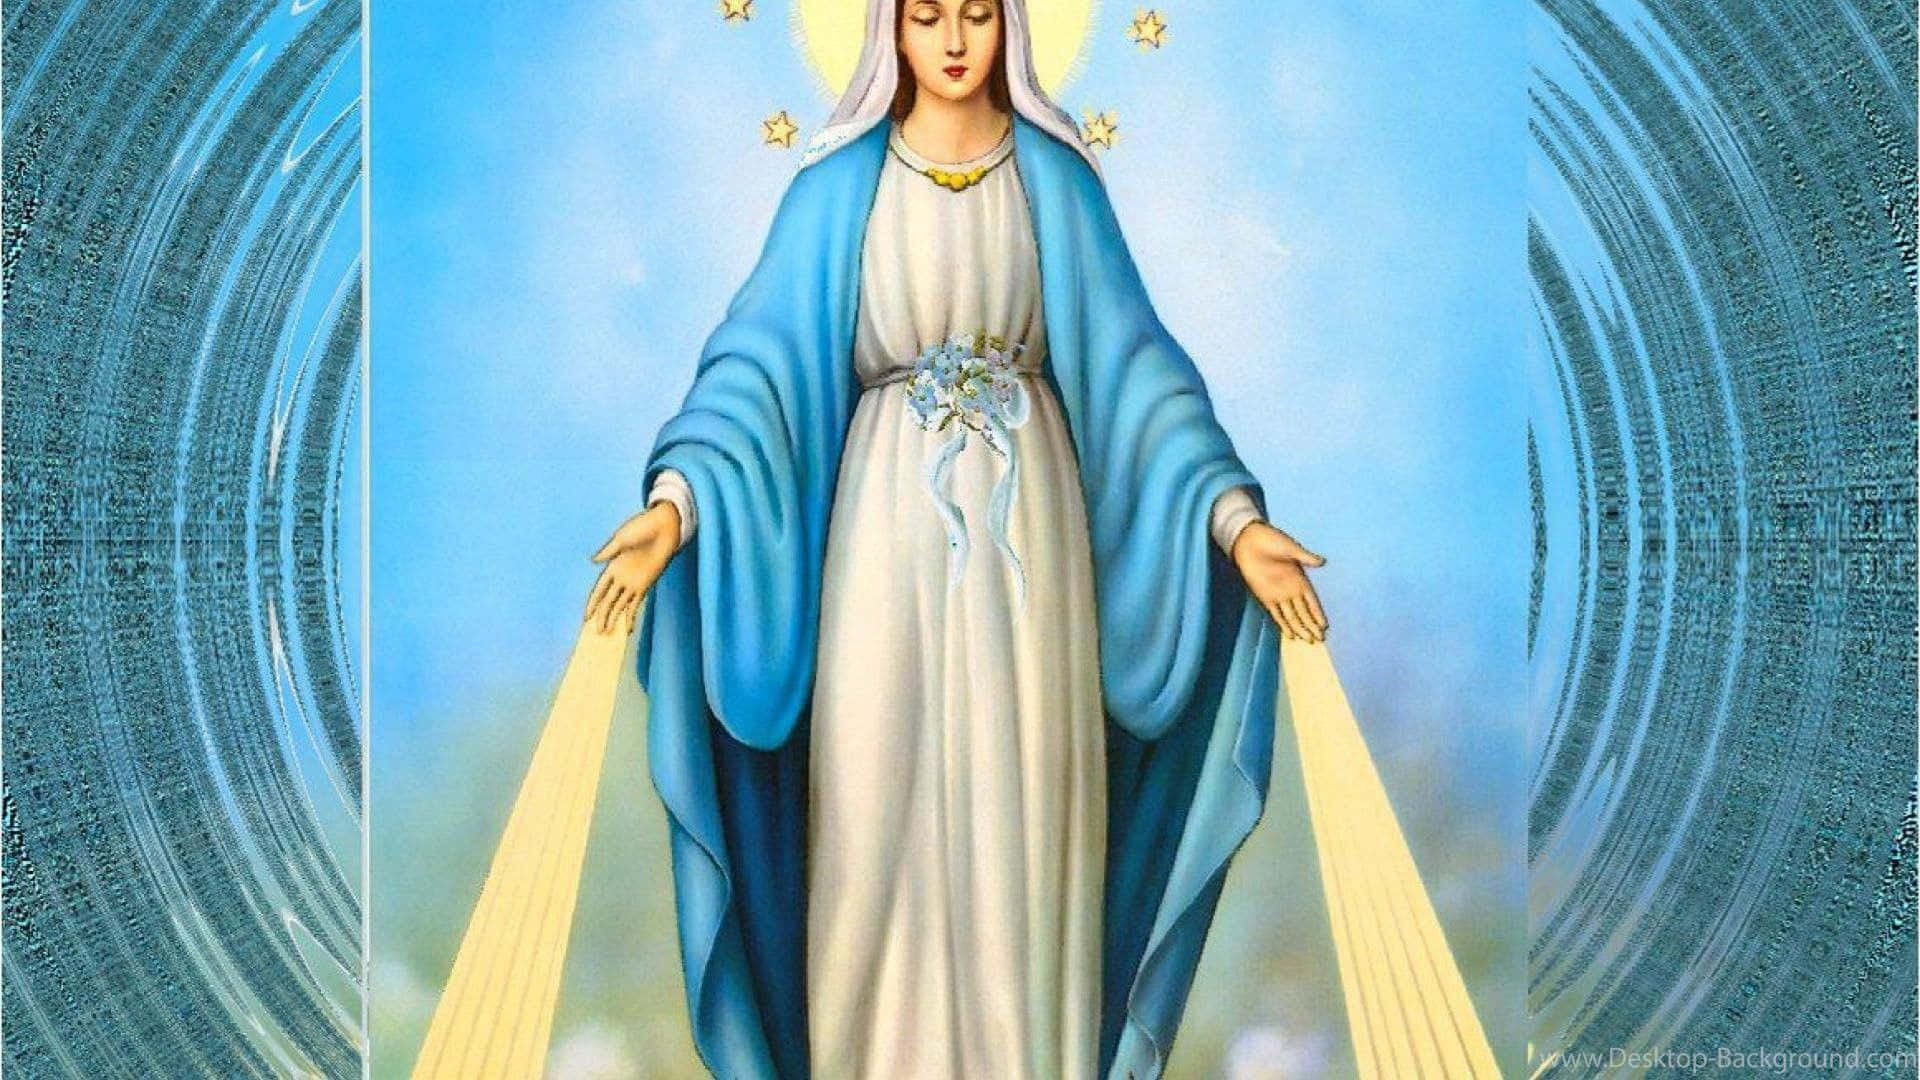 Mother Mary offering blessings Wallpaper